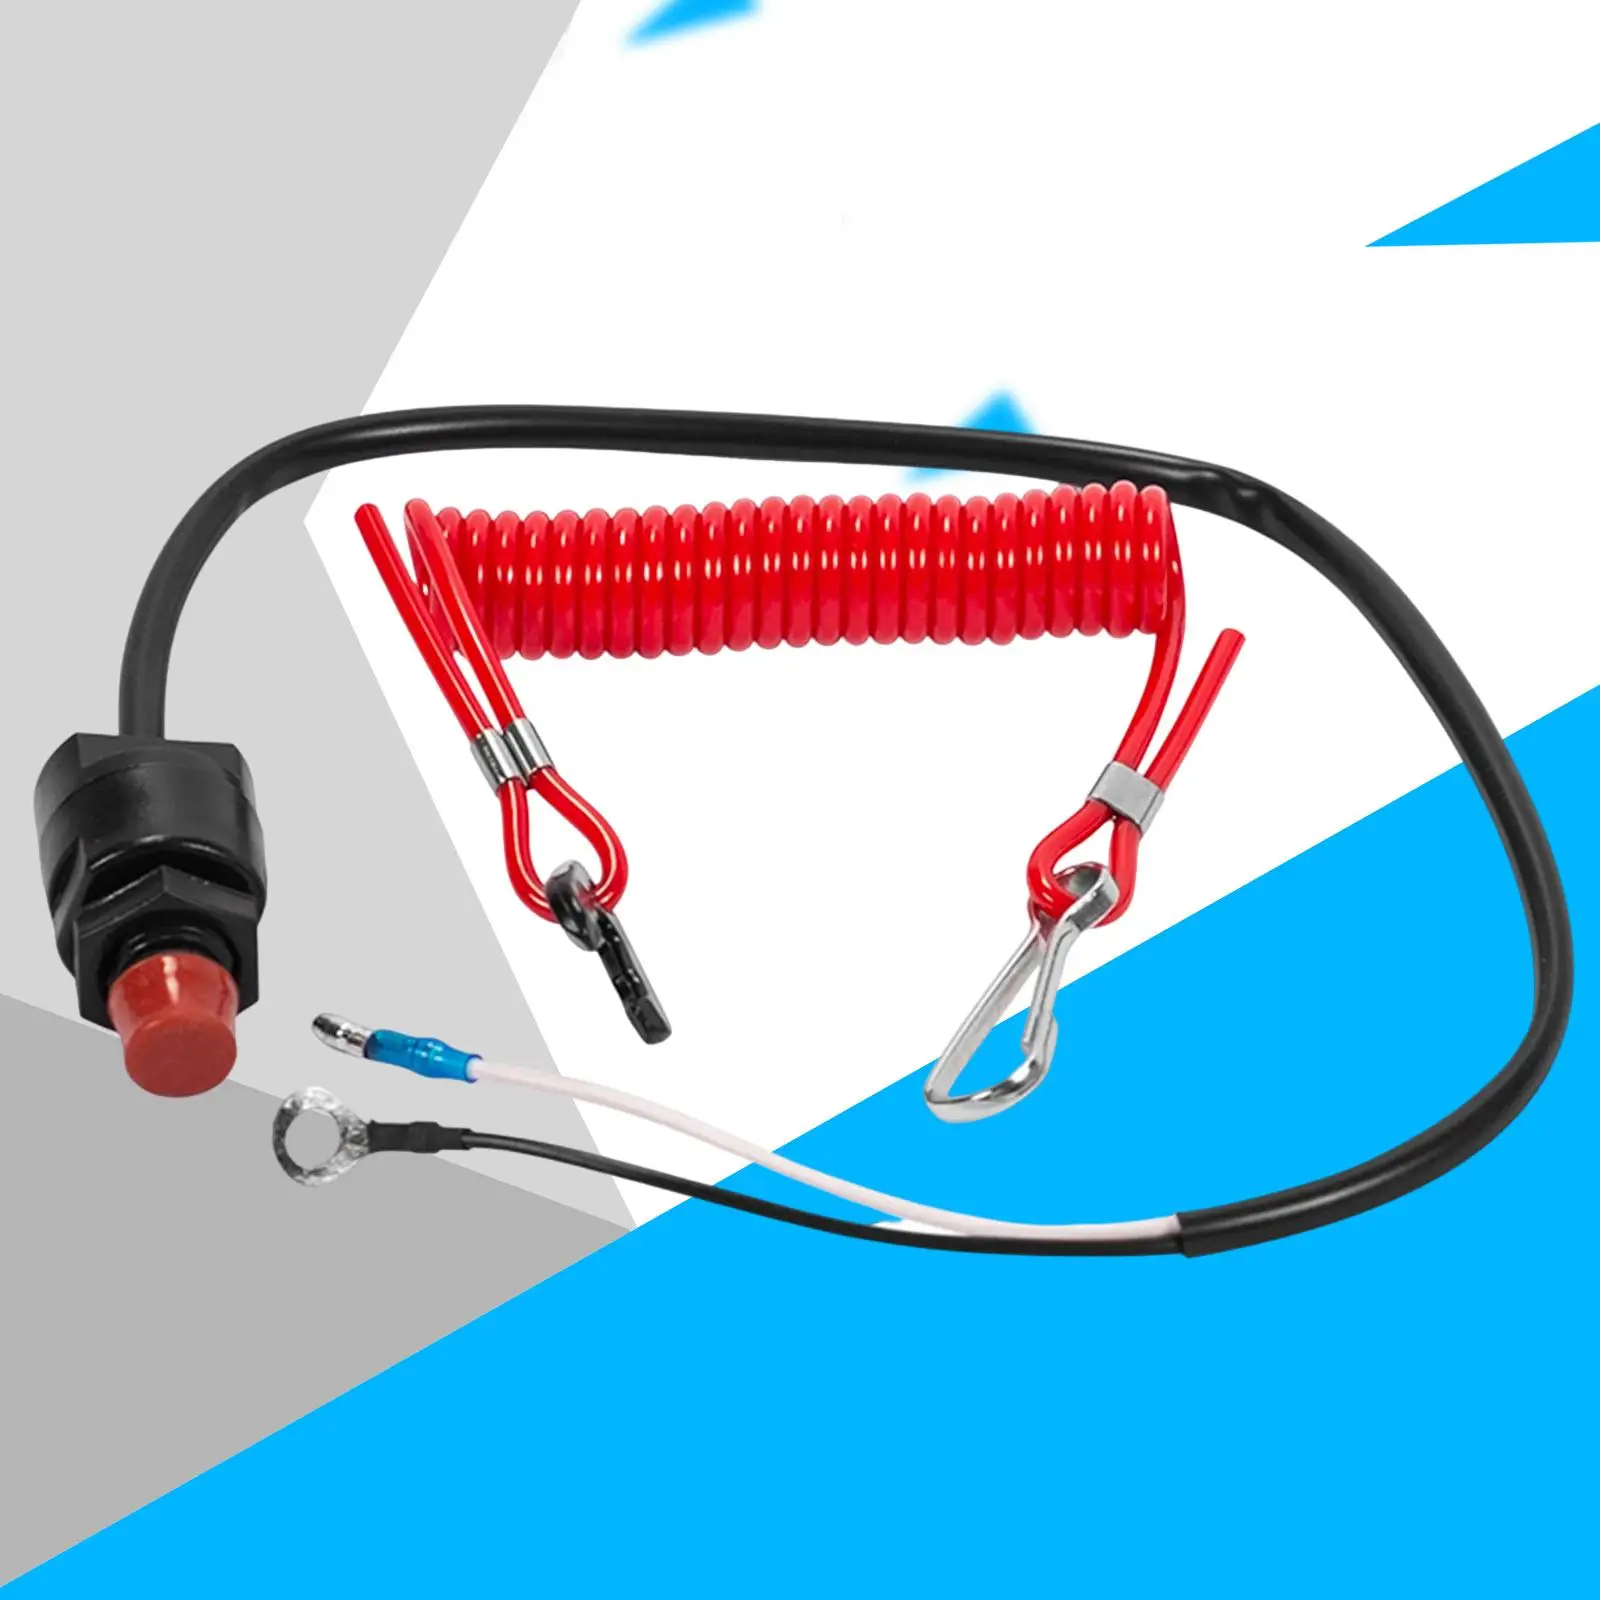 Flameout Switch Key Lanyard Red Safety Tether Lanyard for Boat Outboard